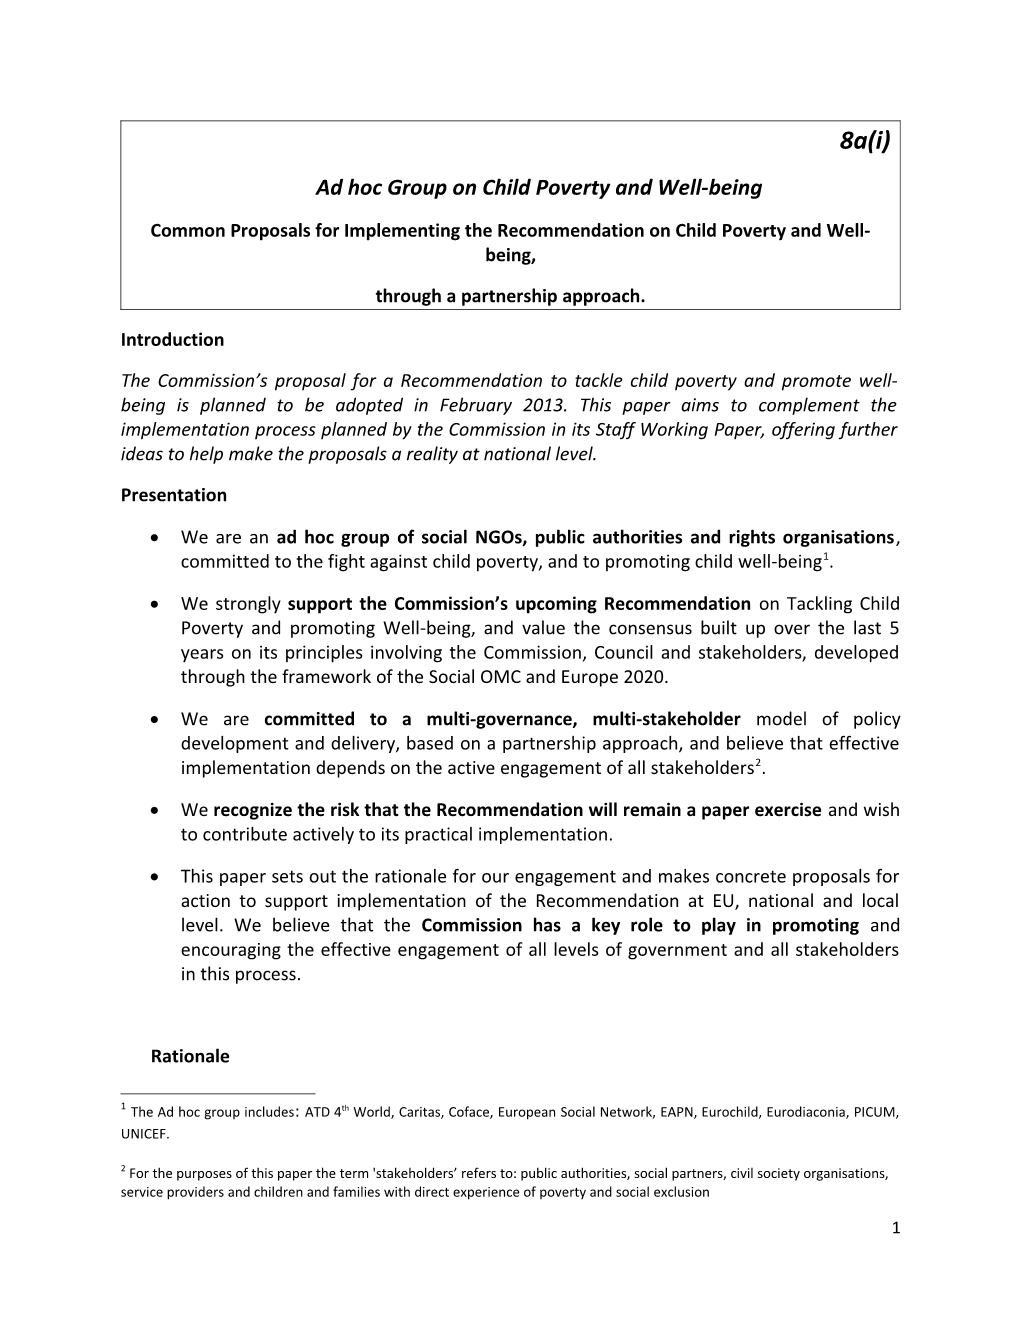 Ad Hoc Group on Child Poverty and Well-Being